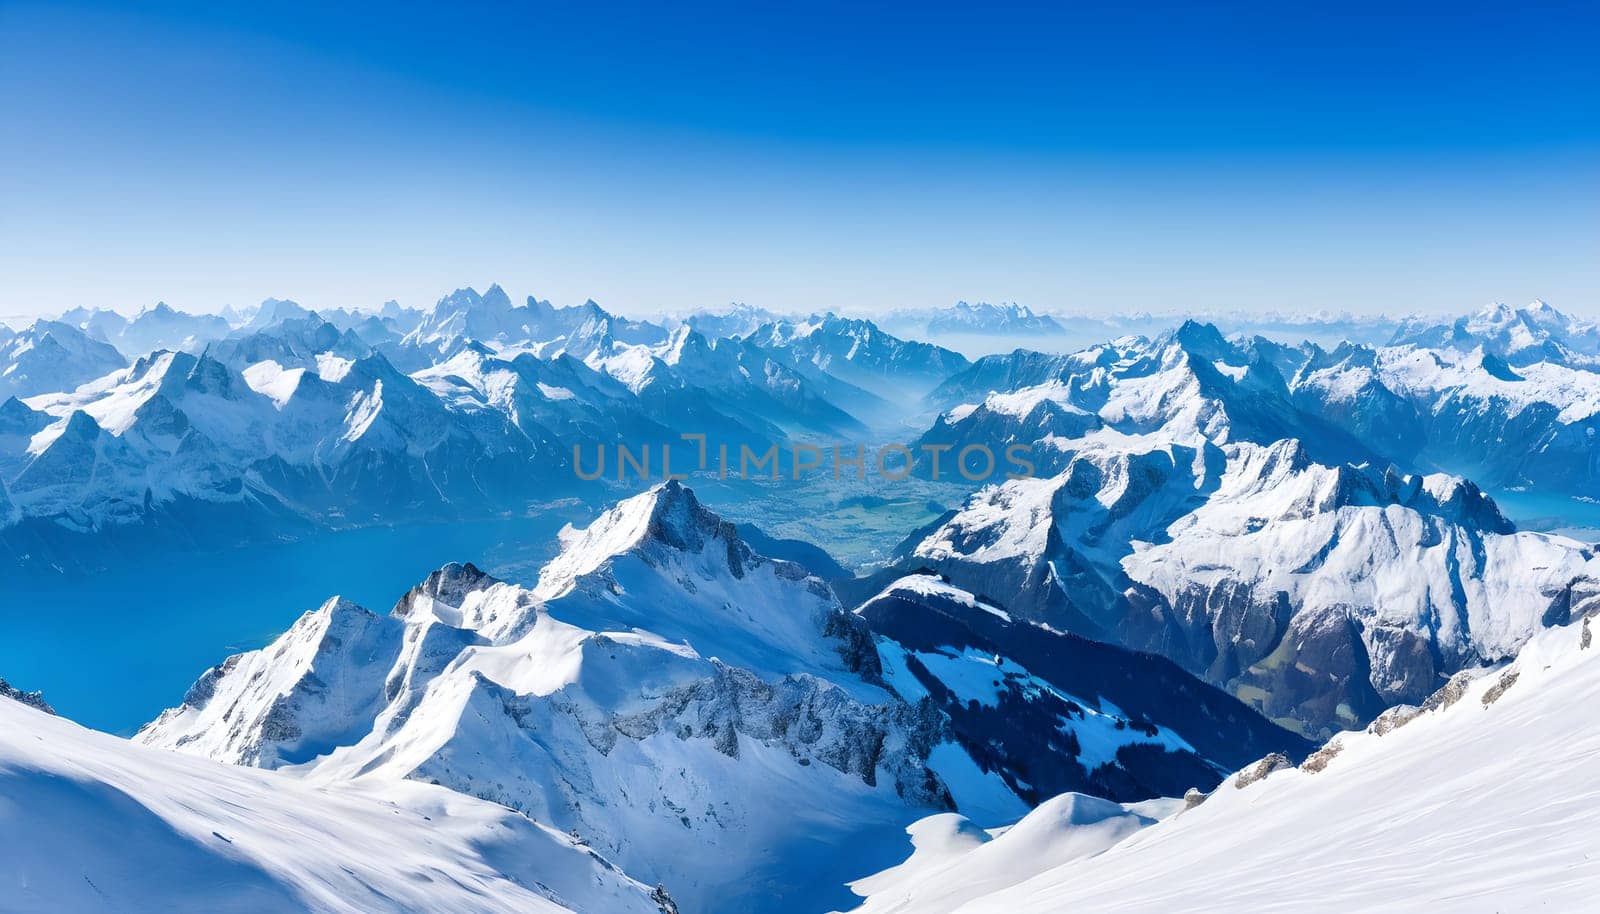 Mountain Majesty: Snow-capped Peaks and Panoramic Views